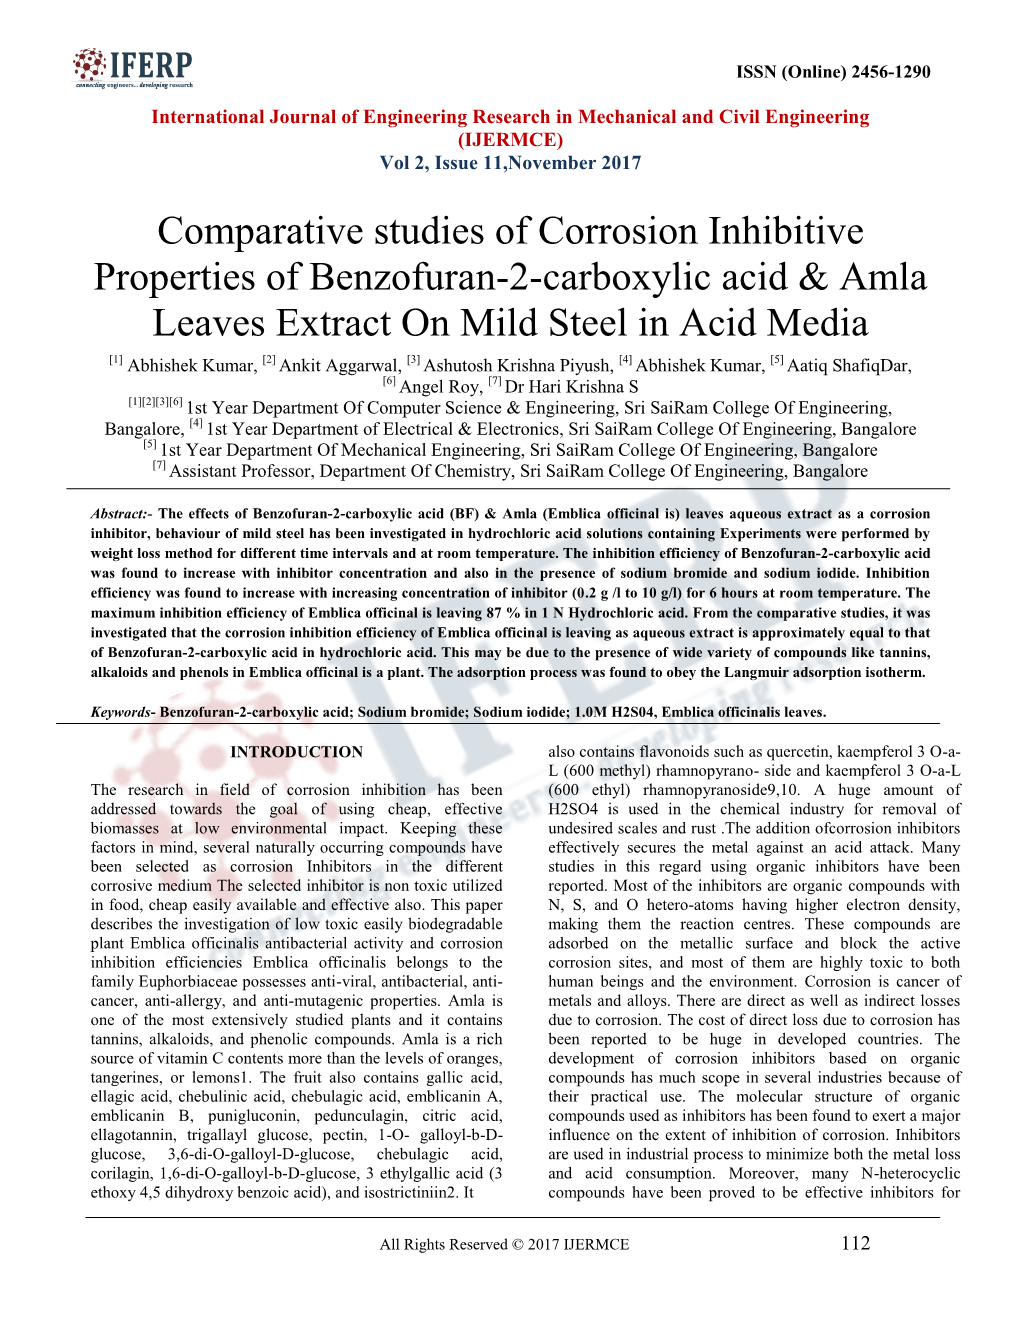 Comparative Studies of Corrosion Inhibitive Properties of Benzofuran